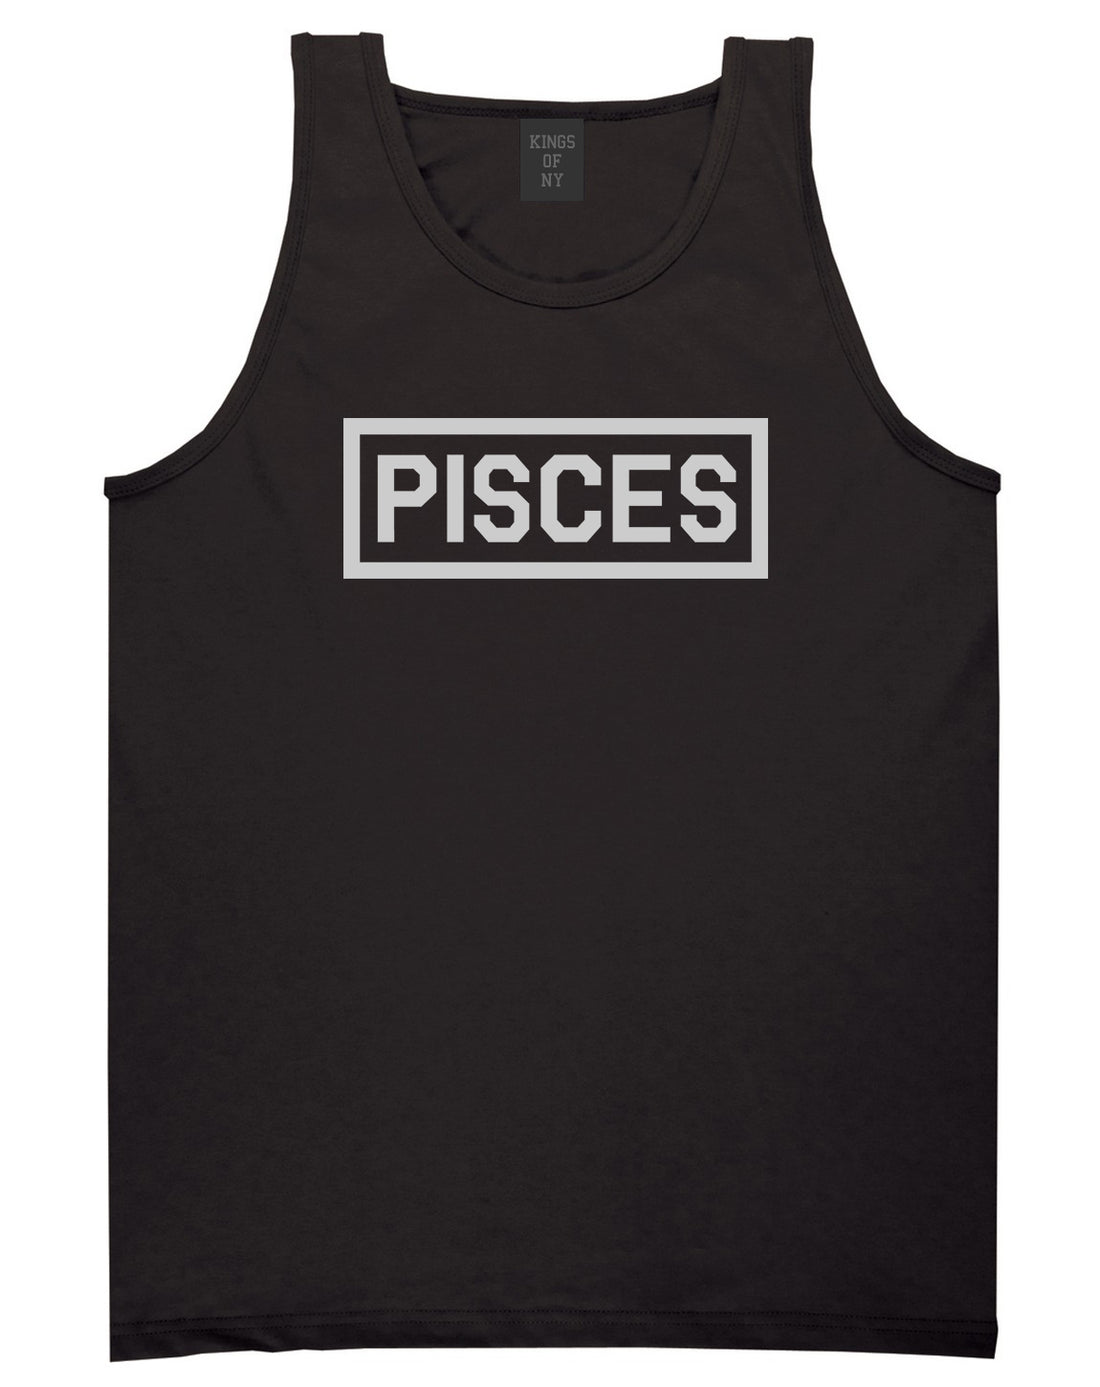 Pisces Horoscope Sign Mens Black Tank Top Shirt by KINGS OF NY